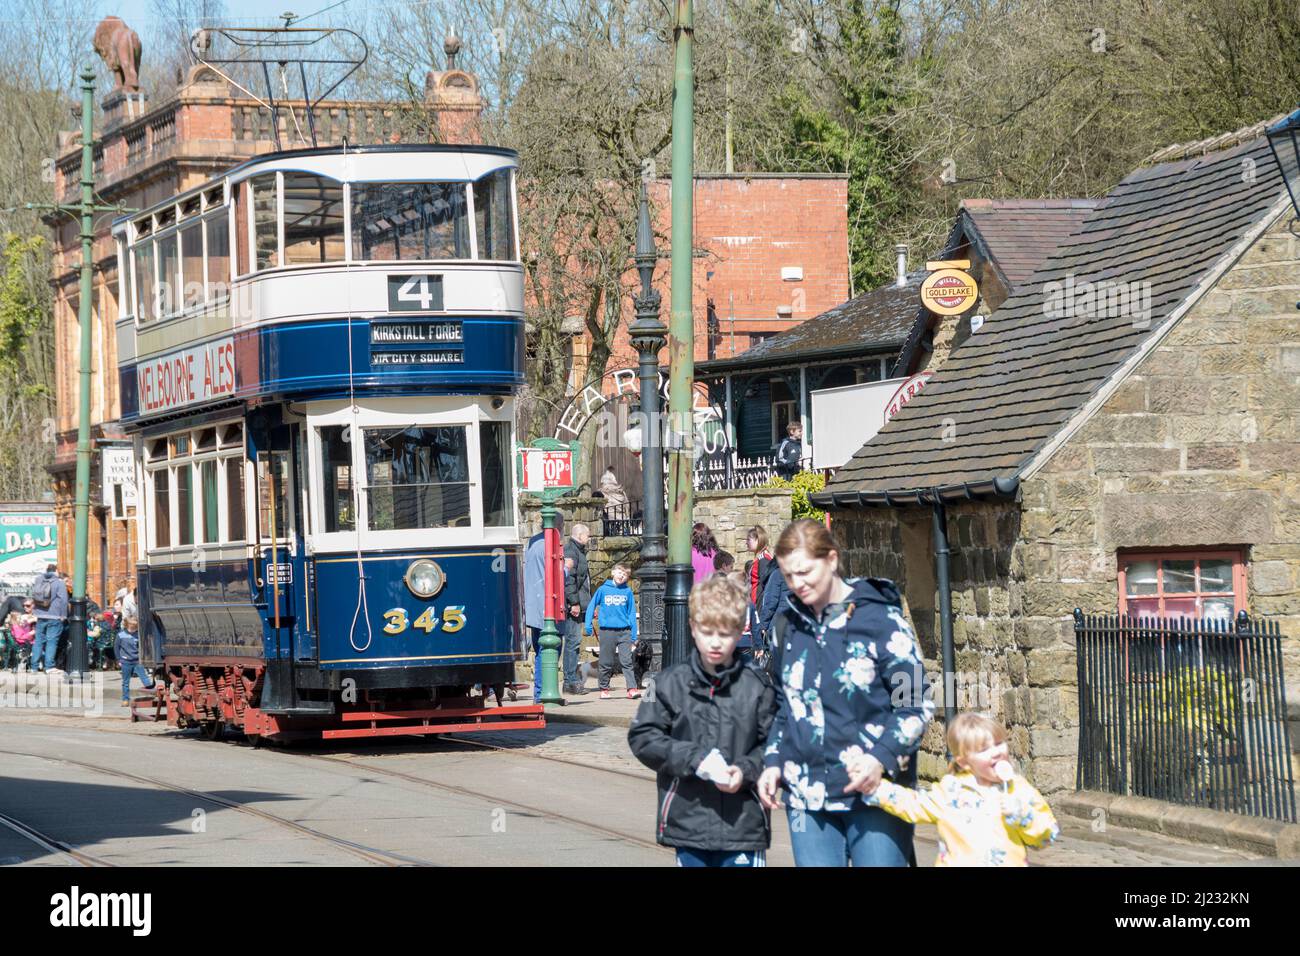 Derbyshire, UK – 5 April 2018: Family crossing the track before the 345 double decker vintage tram at the Red Lion tram stop, Crich Tramway Village Stock Photo